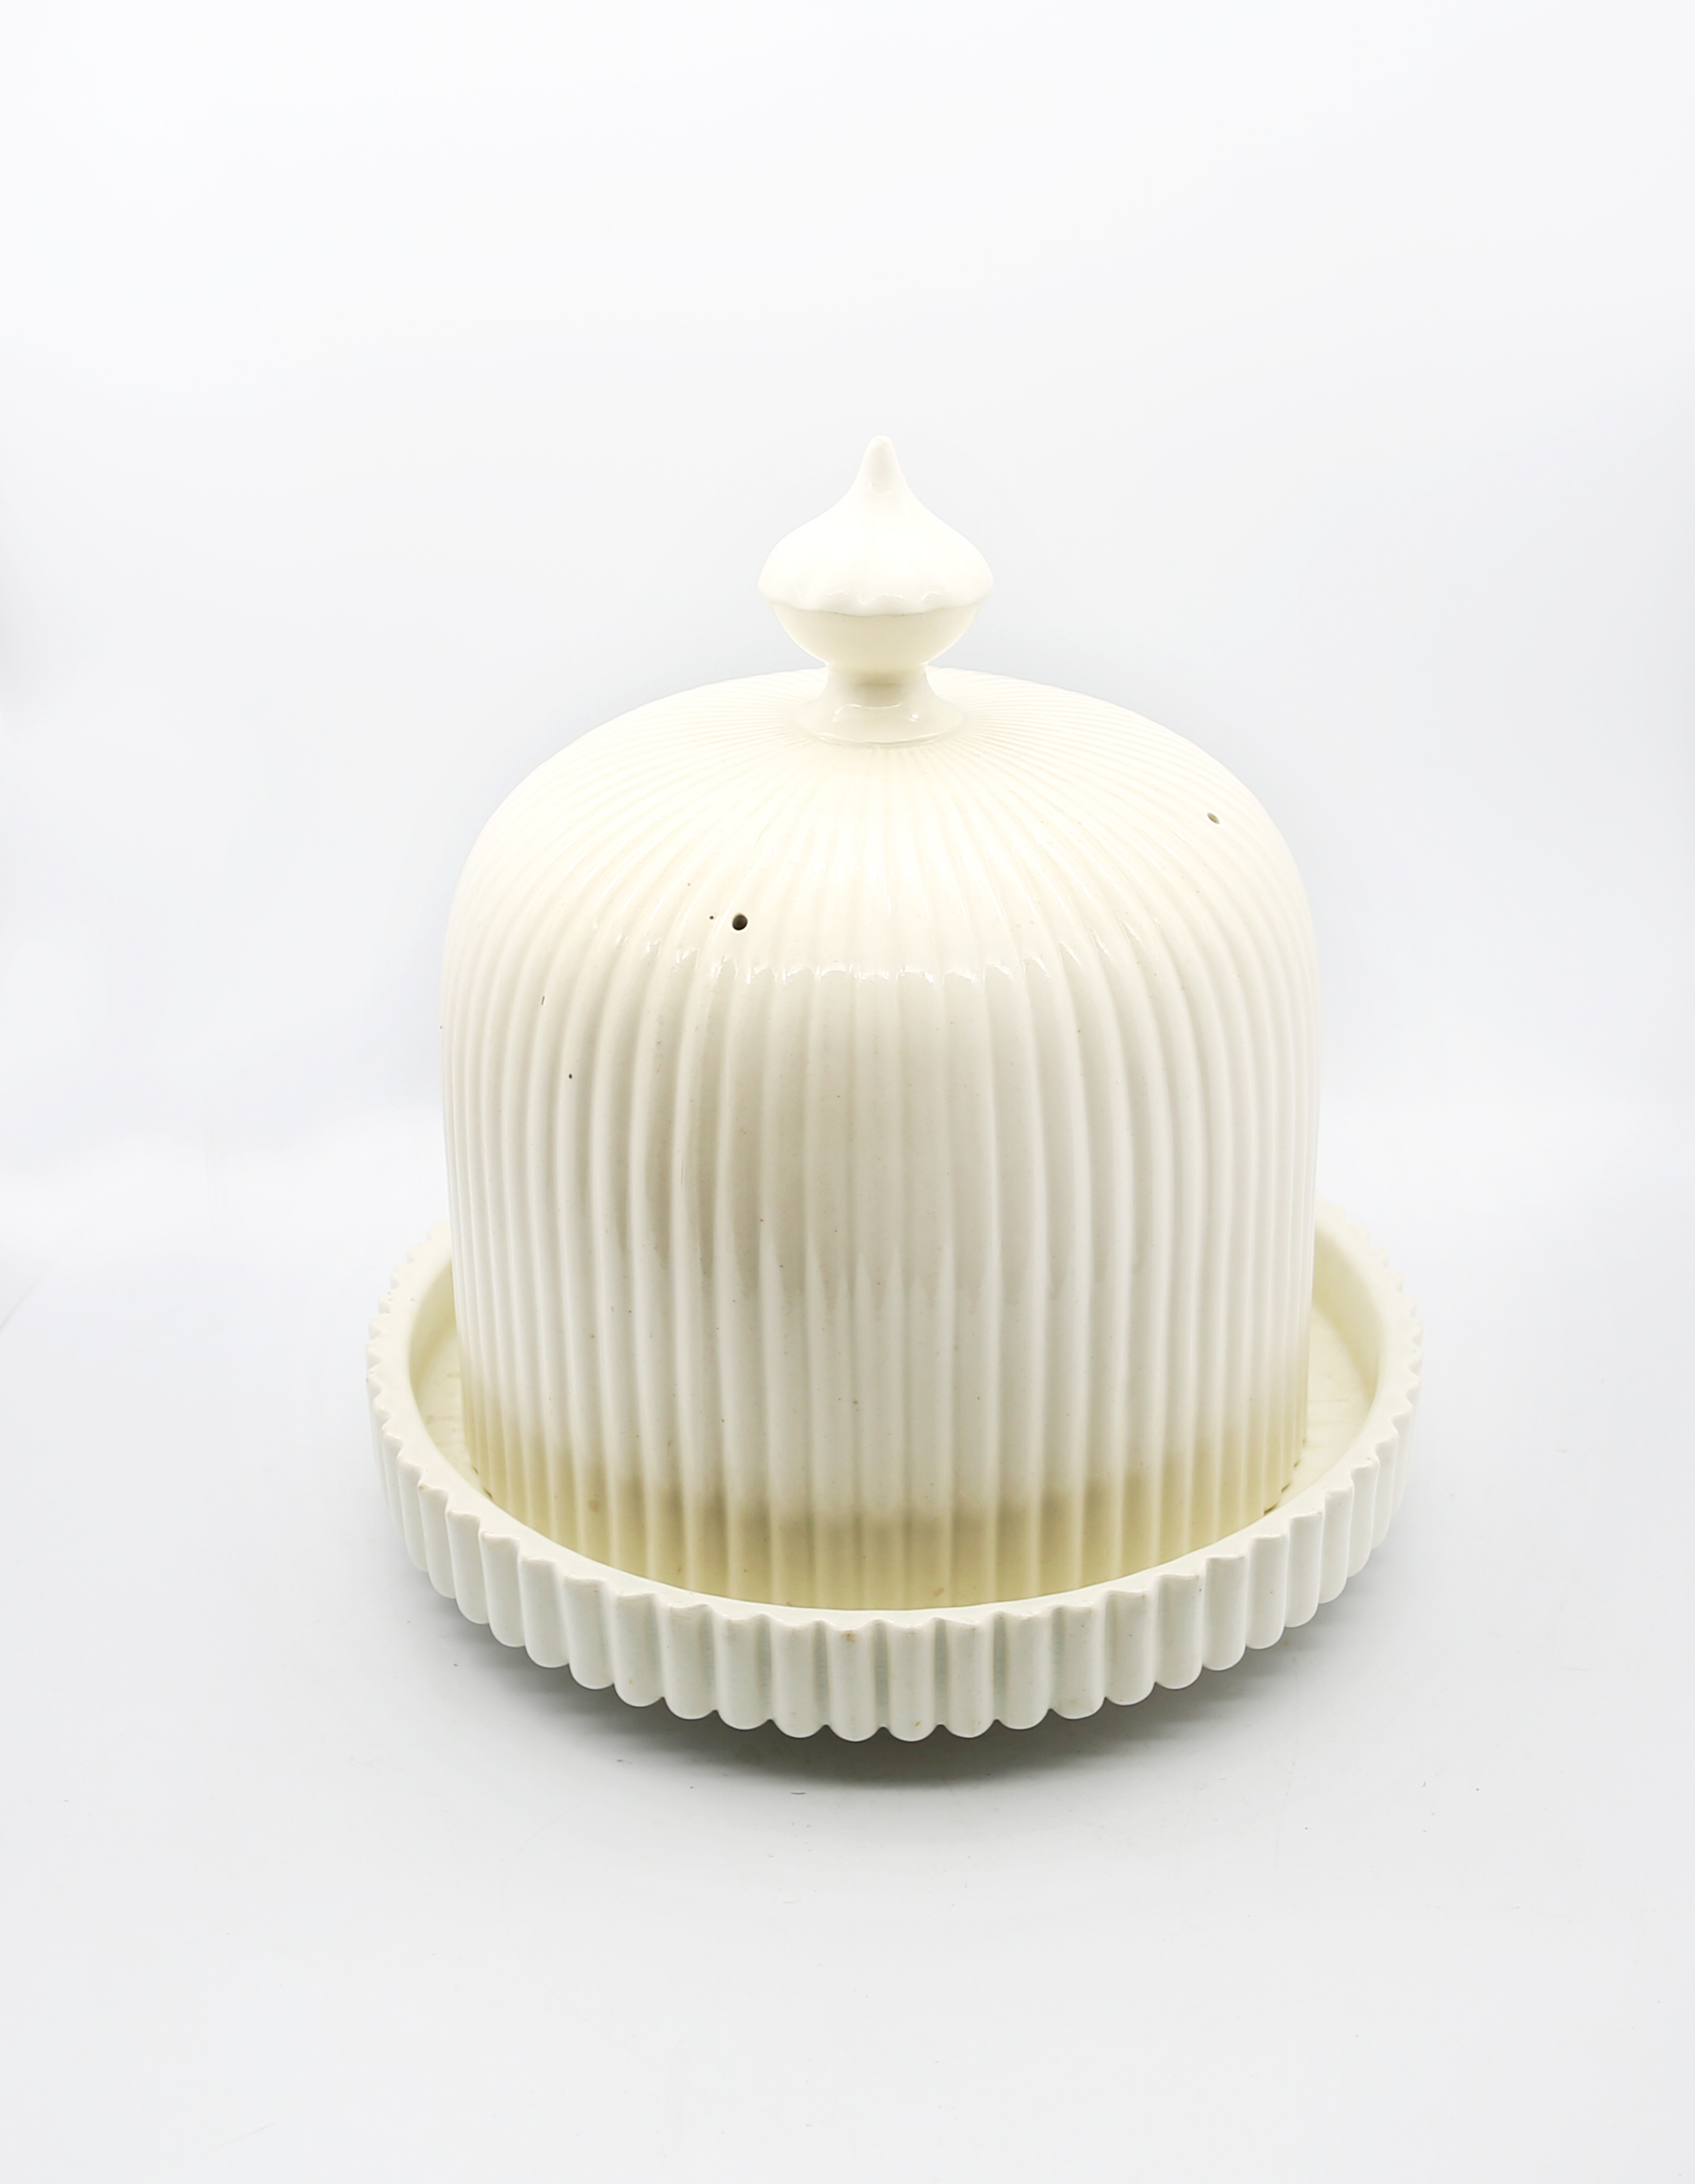 A Copeland ironstone creamware ribbed body cheese dome and base,  Circa 19th century. Impressed